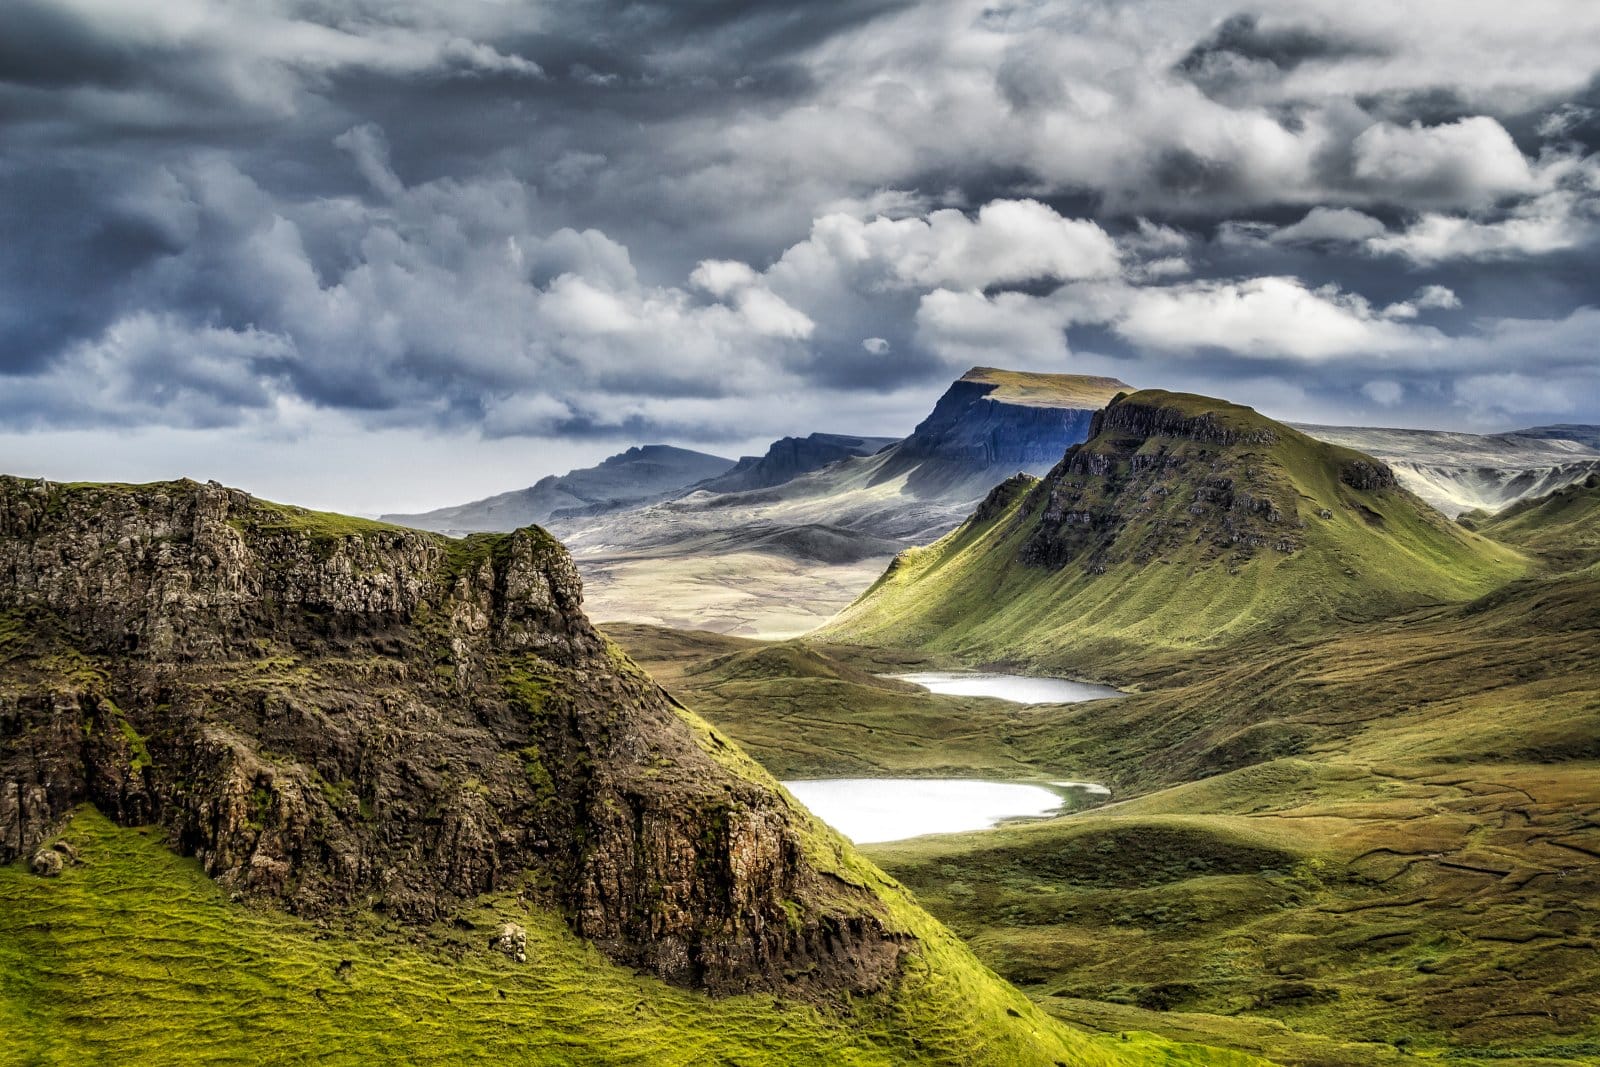 <p>Discover the dramatic scenery of Scotland’s highlands, with their lochs, mountains, and glens.</p>